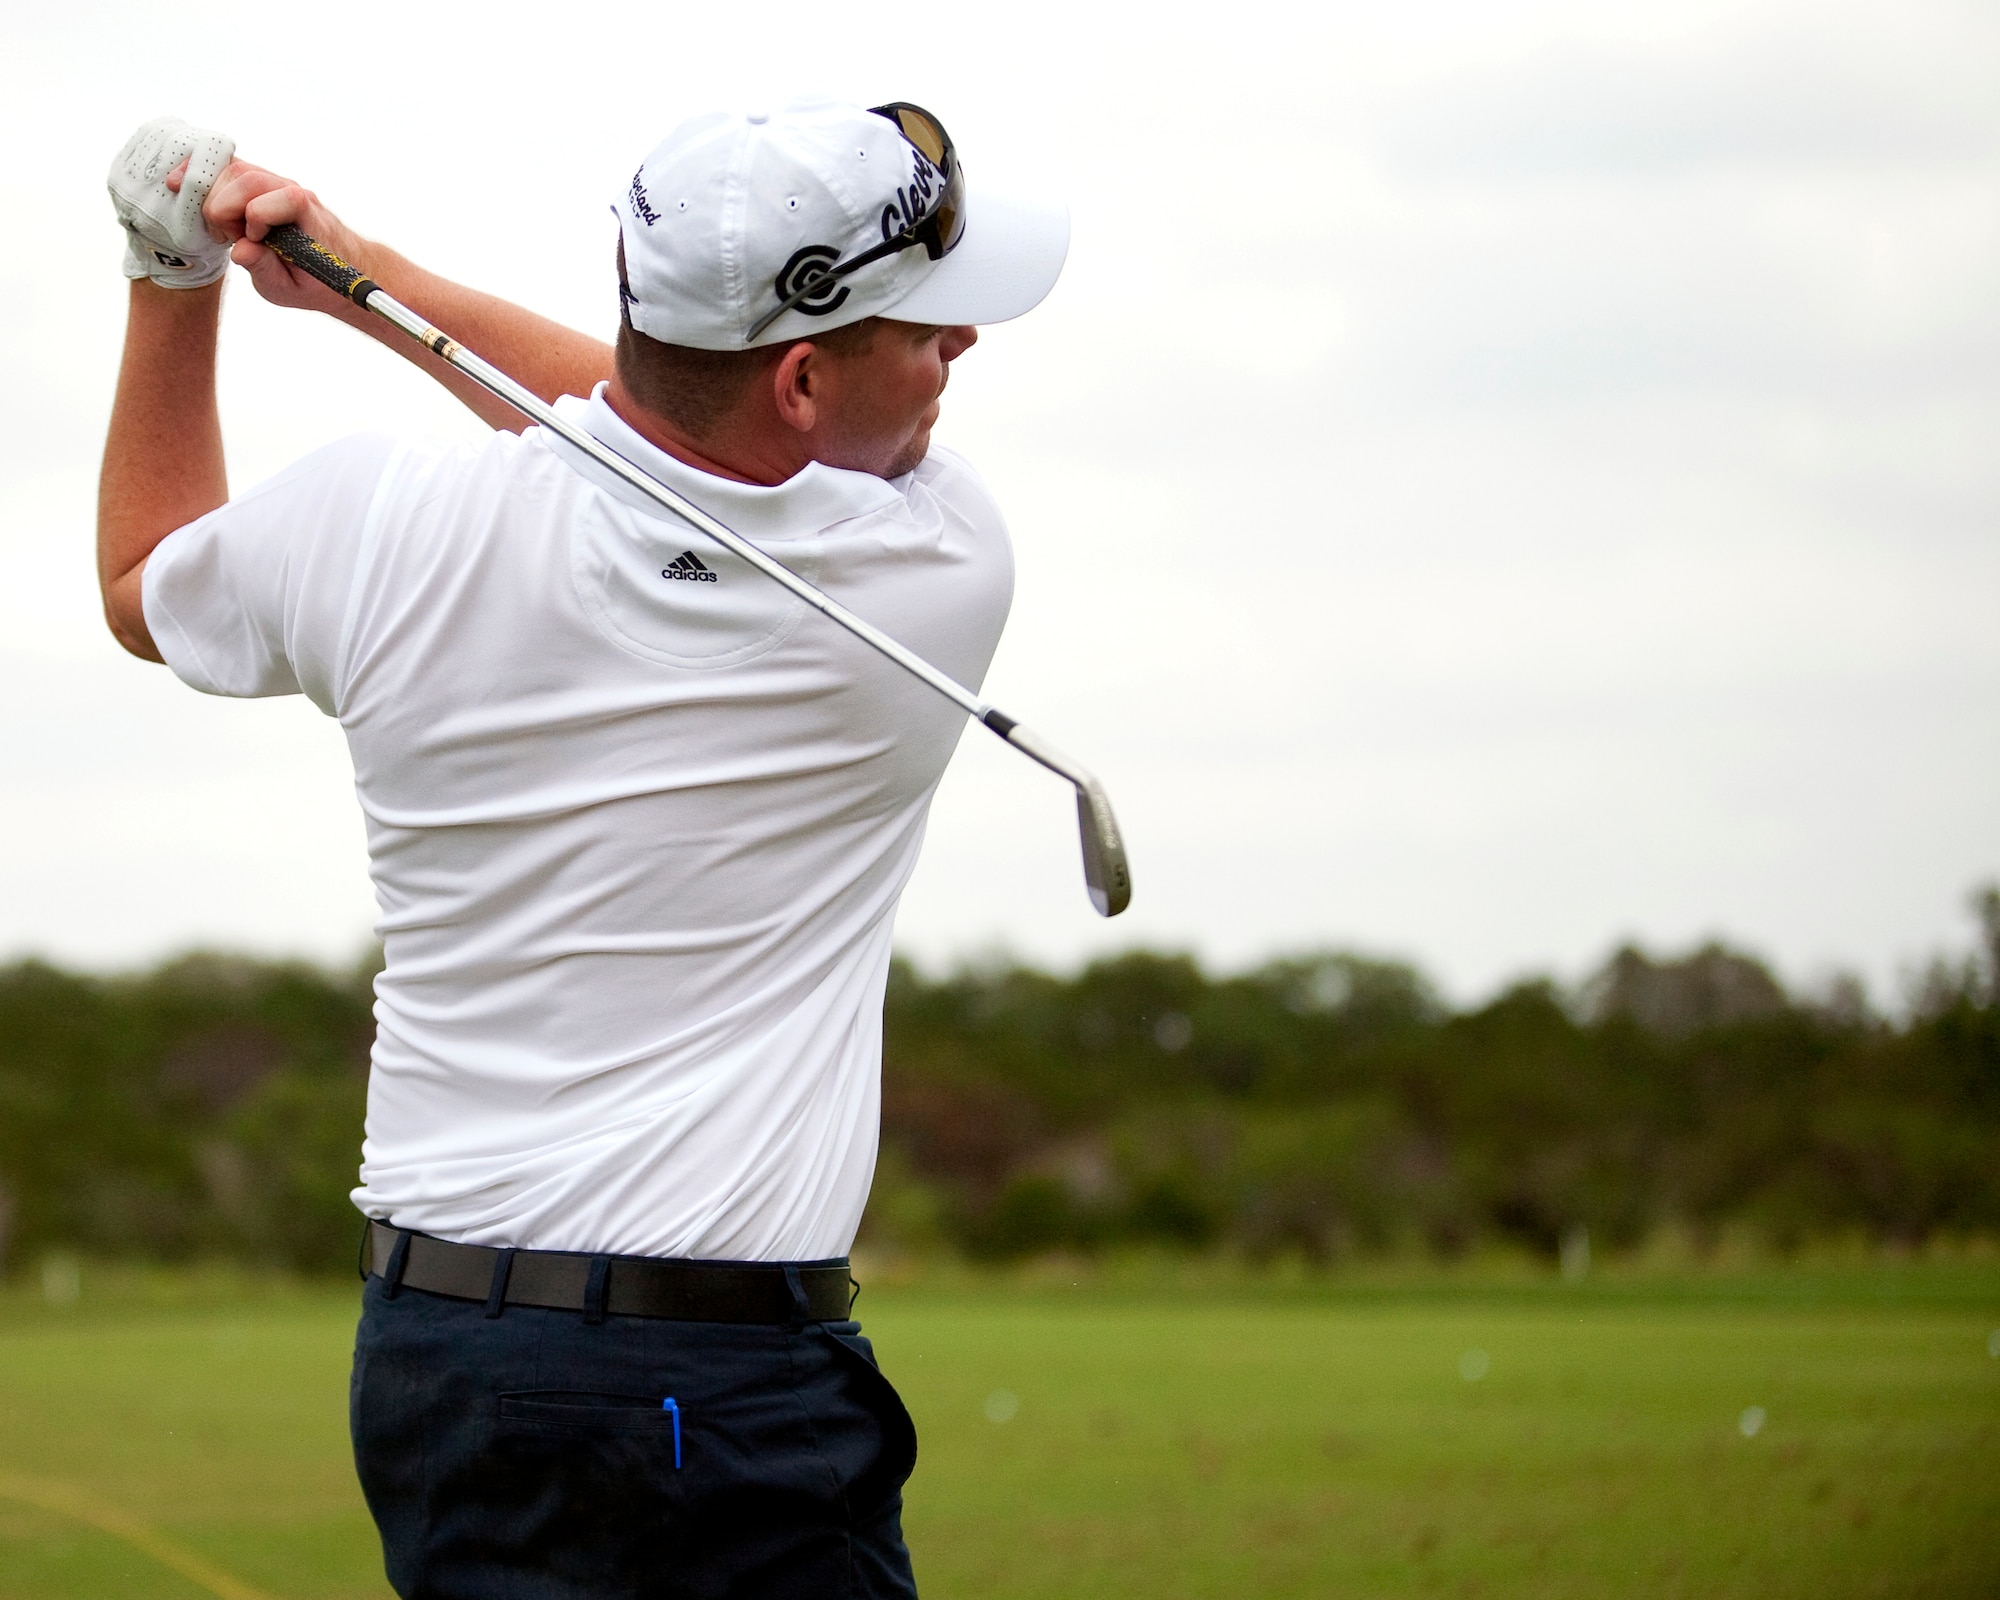 Senior Airman John Little II, from MacDill Air Force Base, Fla., practices his swing.  He was invited to play in the Valero Texas Open here May 13 - 16 which is the third oldest PGA Tour tournament. (U.S. Air Force photo)